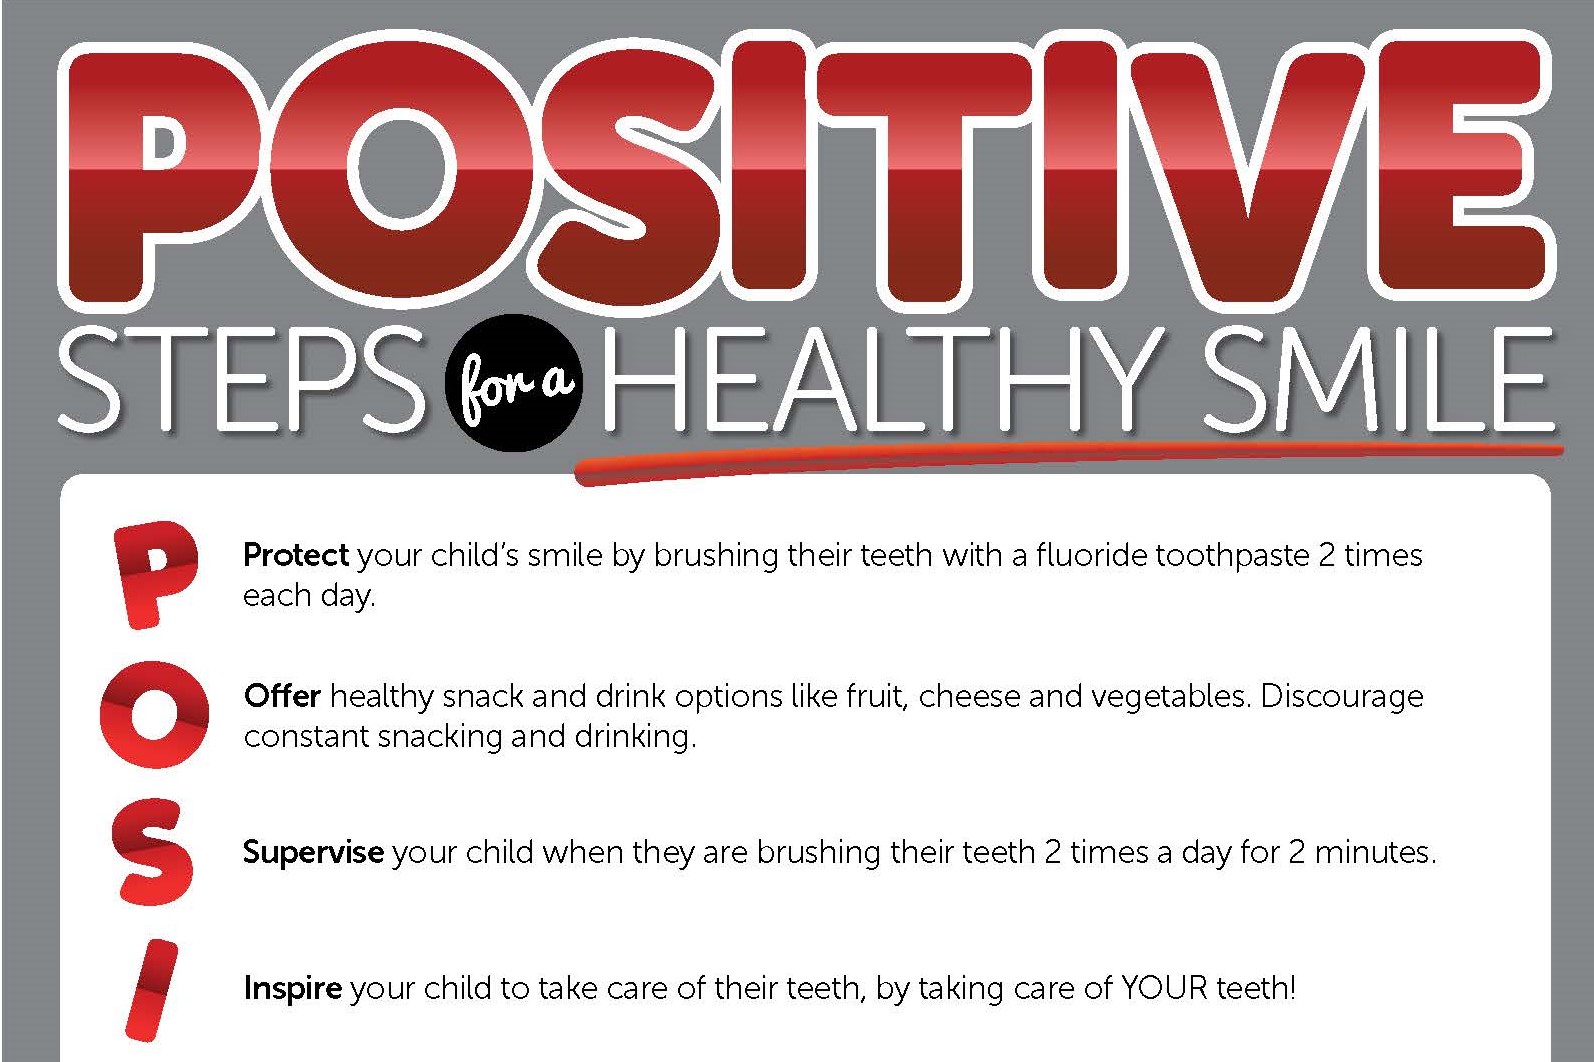 Positive Steps for a Healthy Smile 1